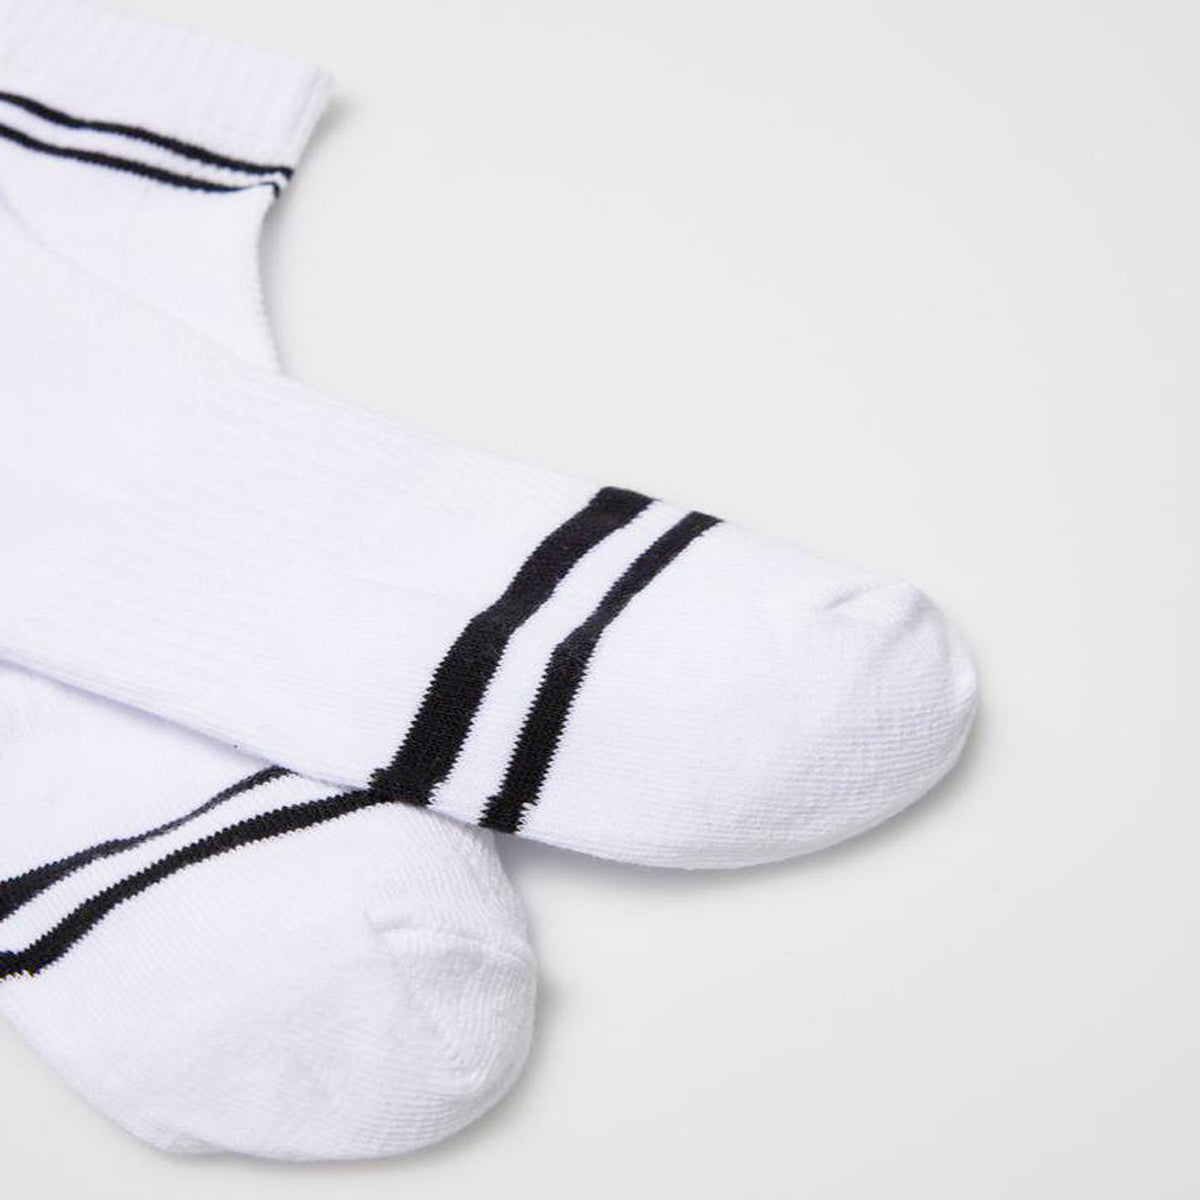 Ysabel Mora 12868 Sporty Socks 3 Pk - Three pack of low cotton ankle socks (black, white and pale pink) with a double sports striped cuff and striped toe with a built in elasticated band across the foot for extra support.